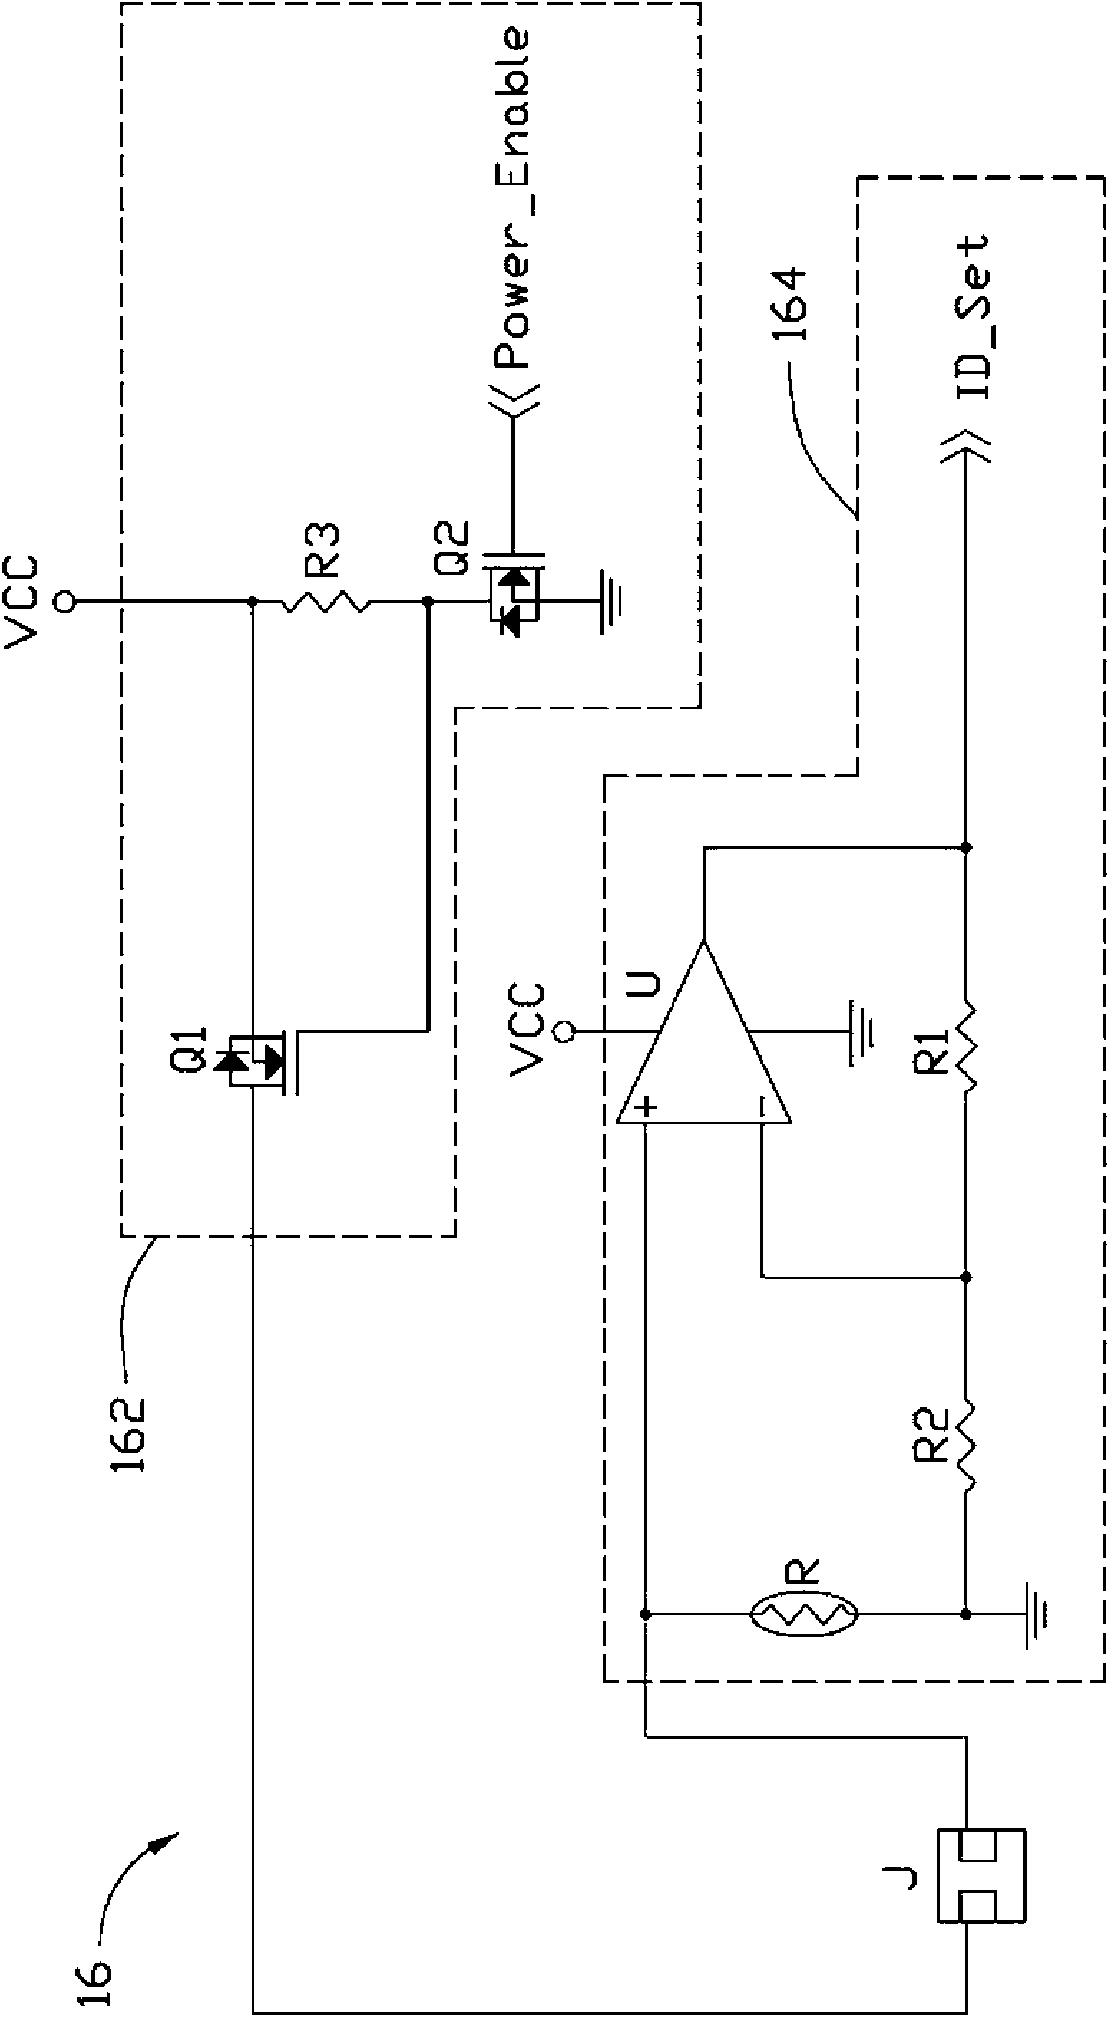 Master device and slave device communication circuit